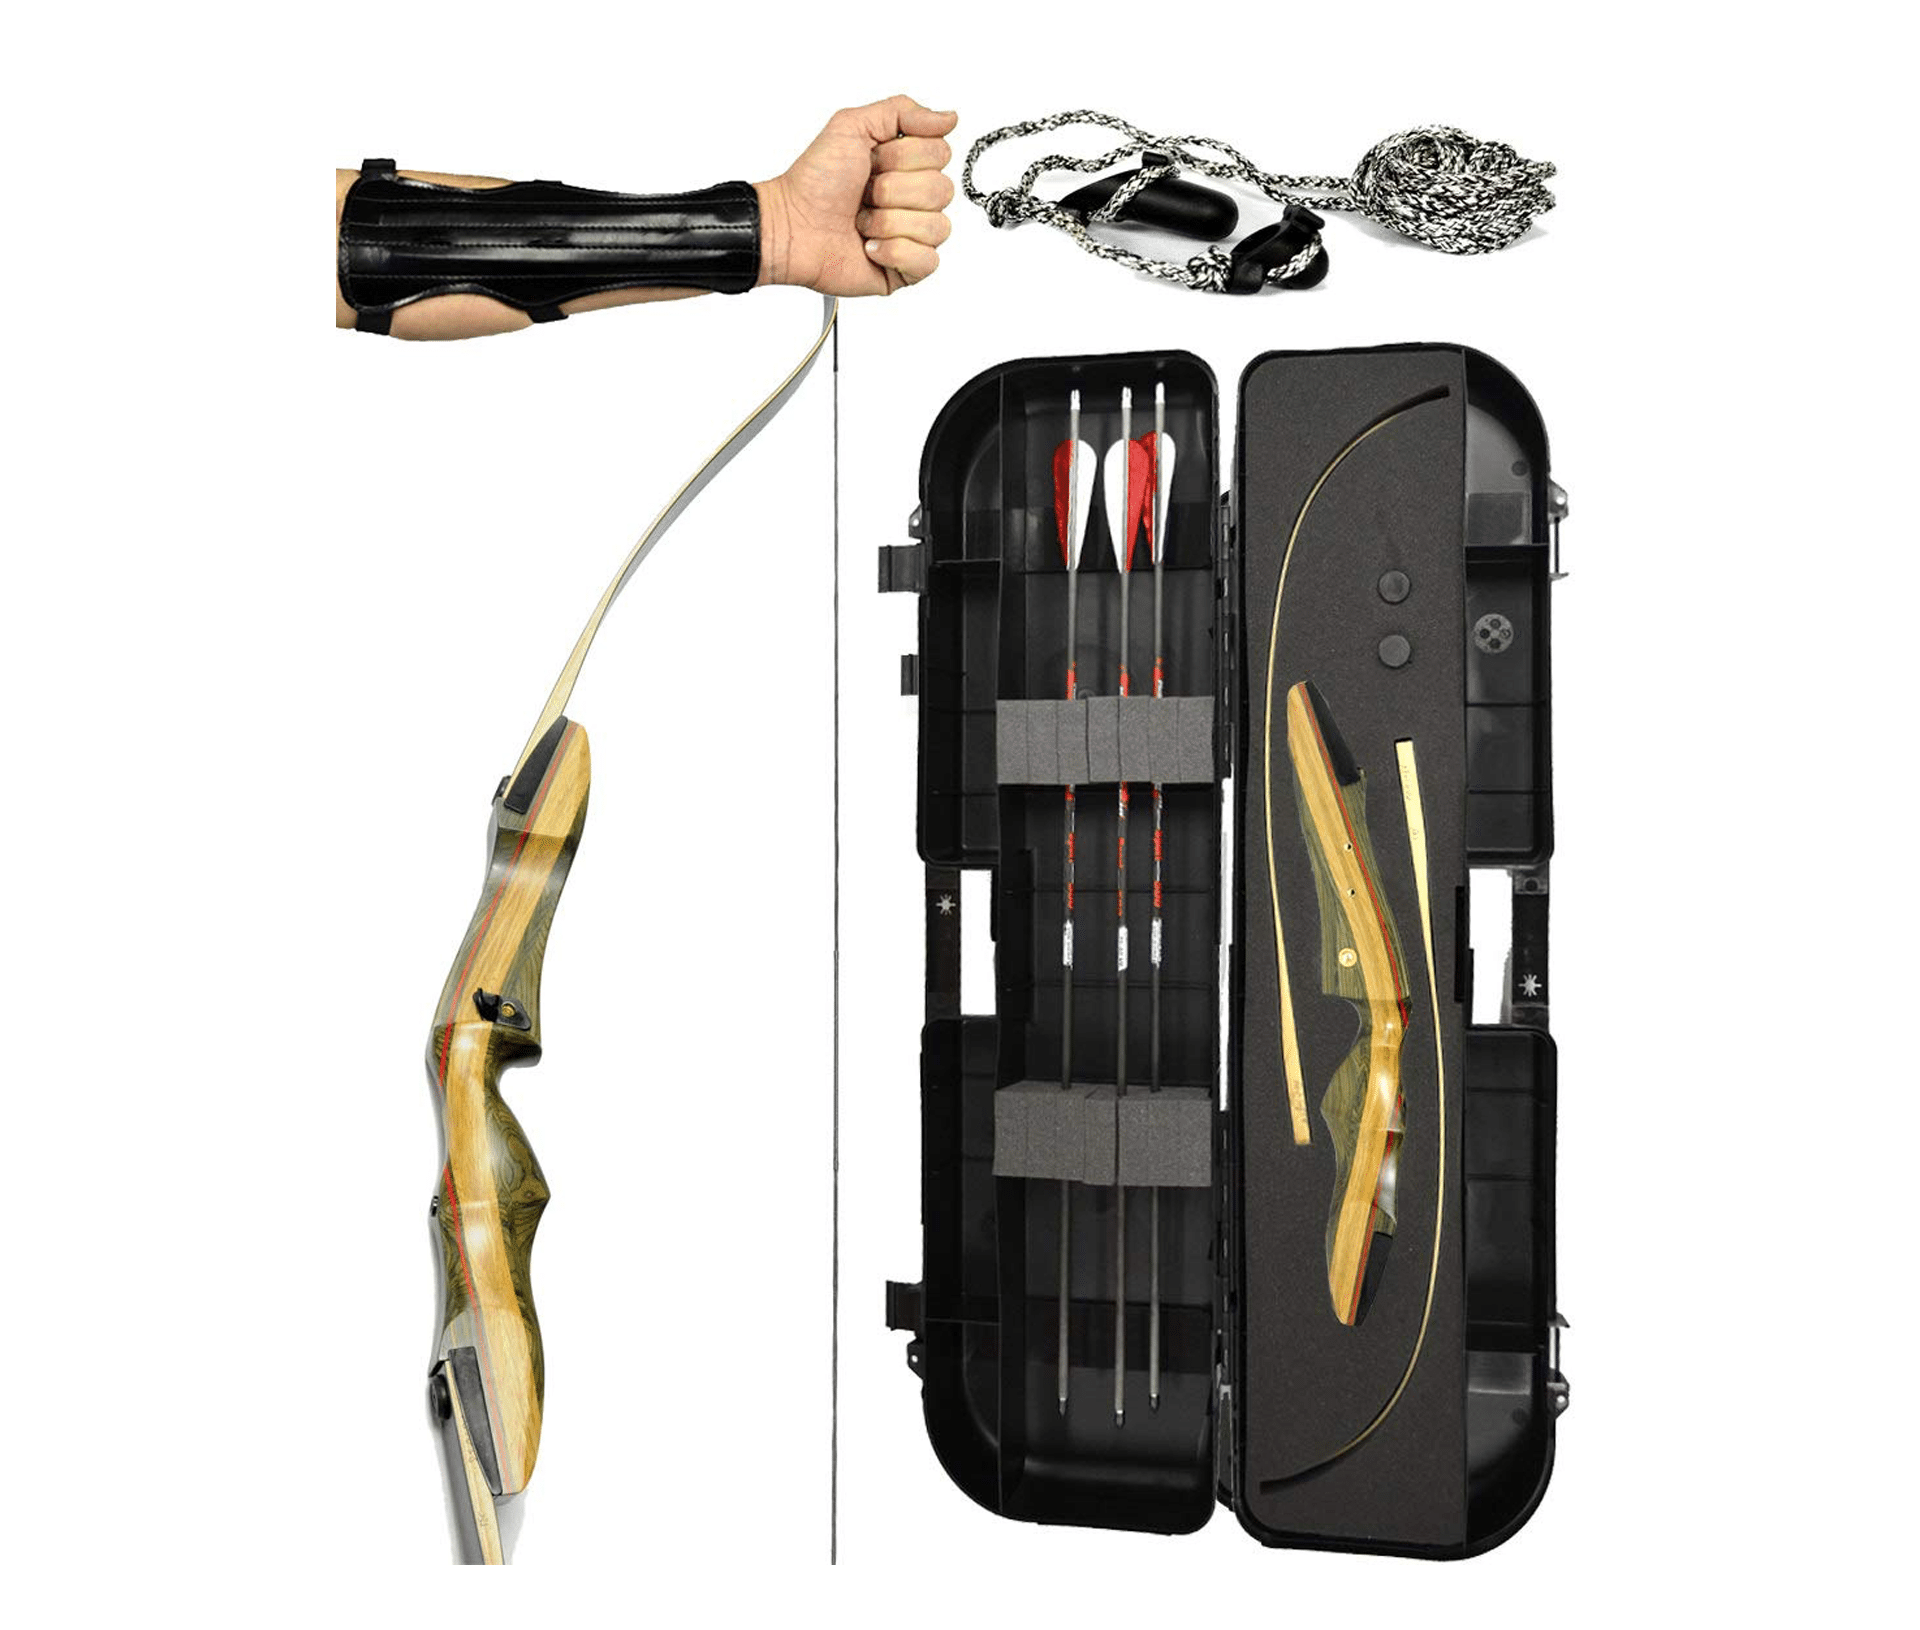 Left Hand, 15lb KAINOKAI 62 Takedown Recurve Bow,Right & Left Hand,Hunting Recurve Archery Bow for Teens and Adults,15-60 lbs 